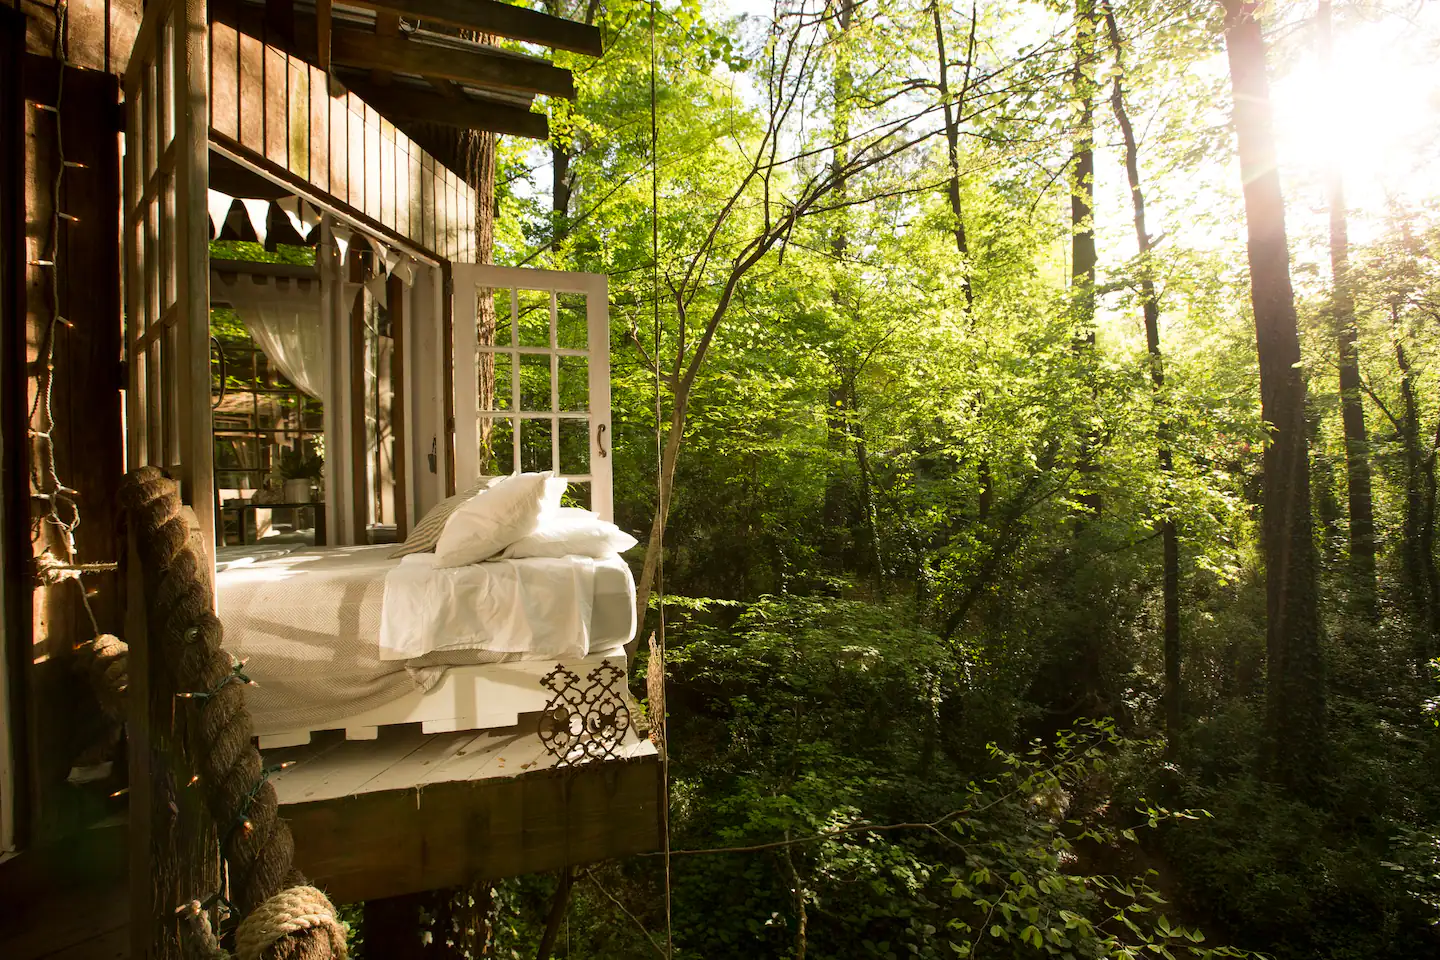 Secluded Intown Treehouse Glamping in Georgia